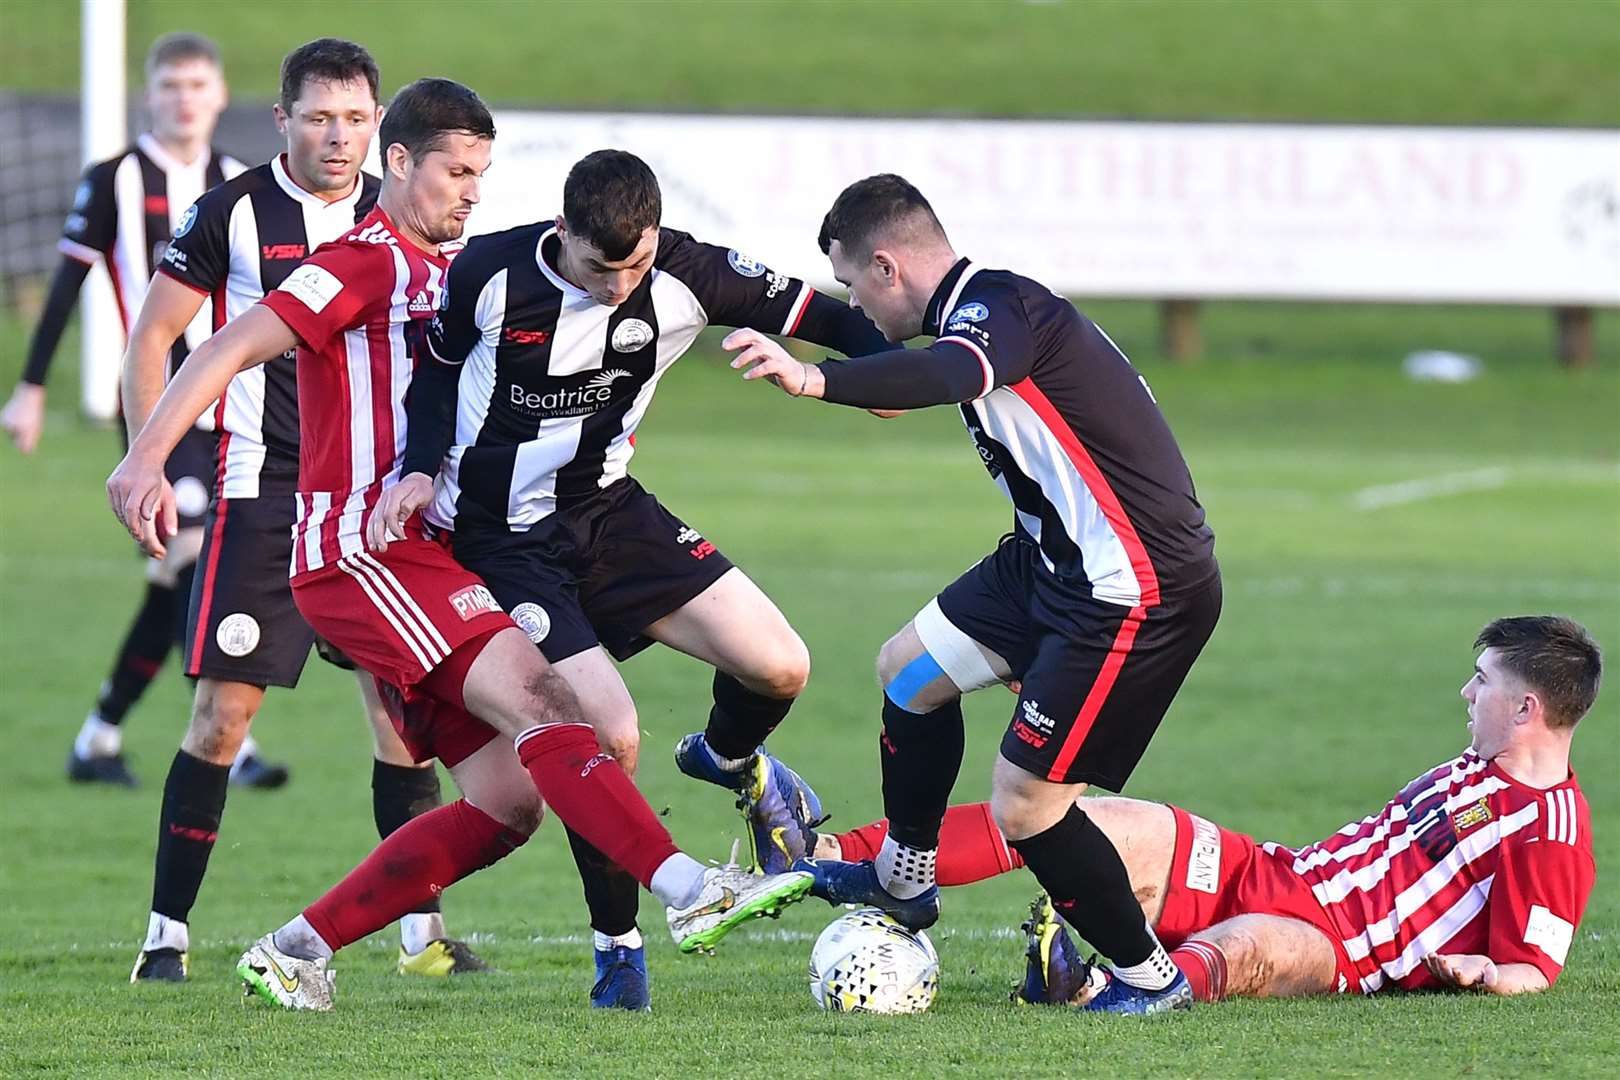 Wick Academy's Gordon MacNab gets his foot on the ball during a scramble for possession. Picture: Mel Roger